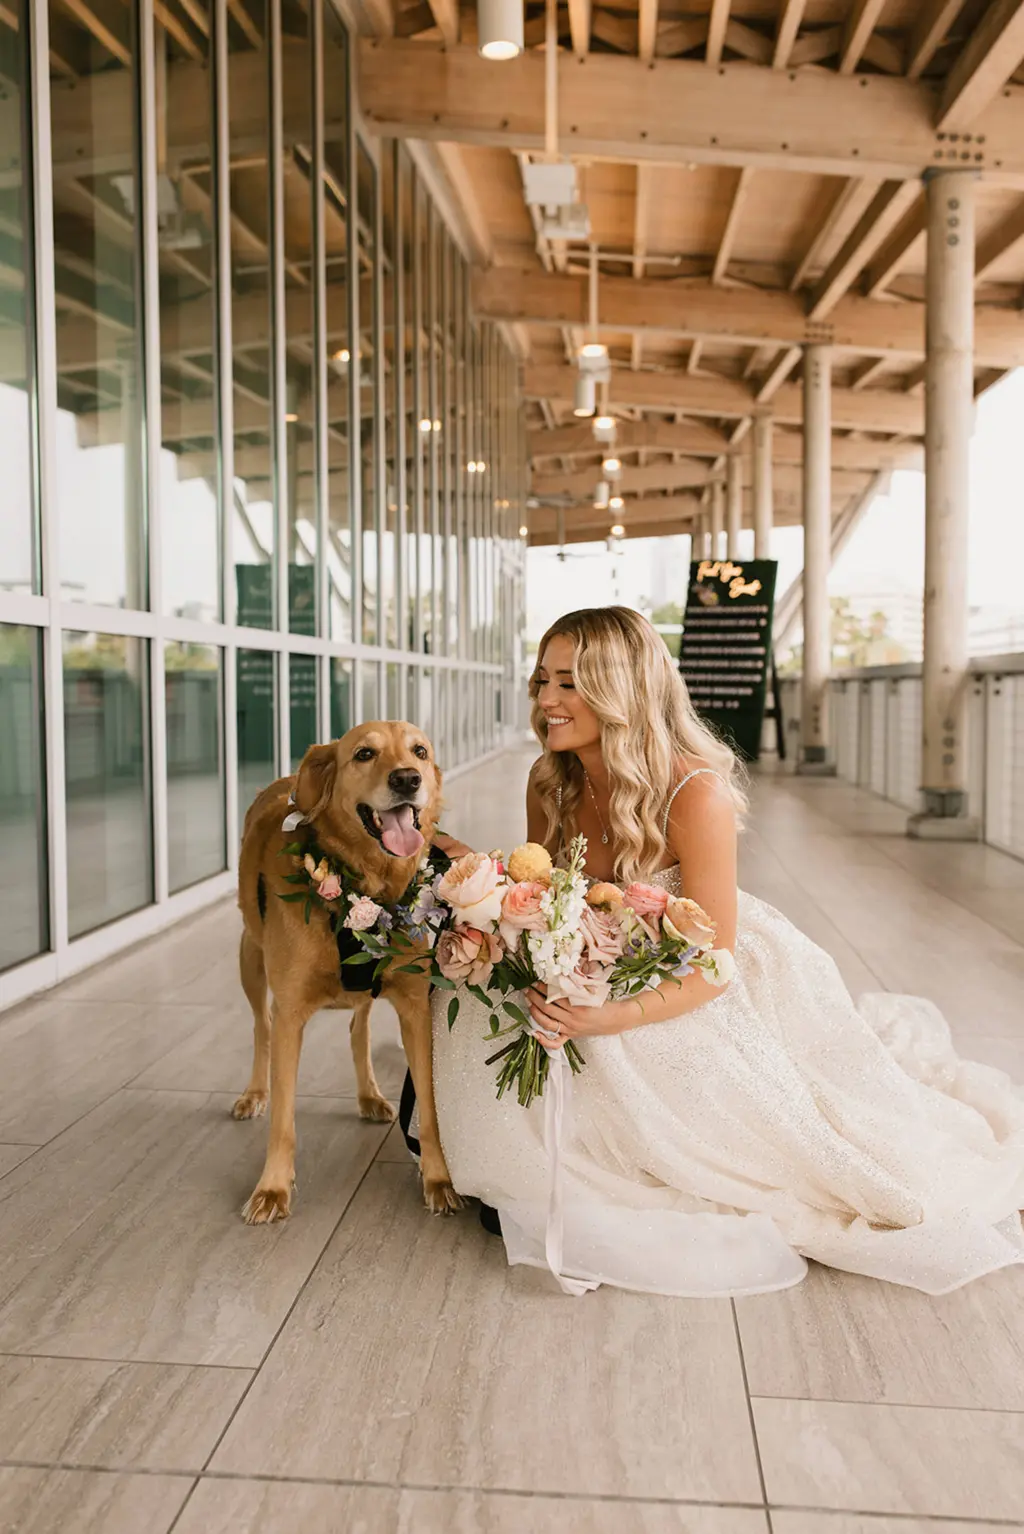 Bride with Dog on Wedding Day | Tampa Bay FairyTail Pet Care